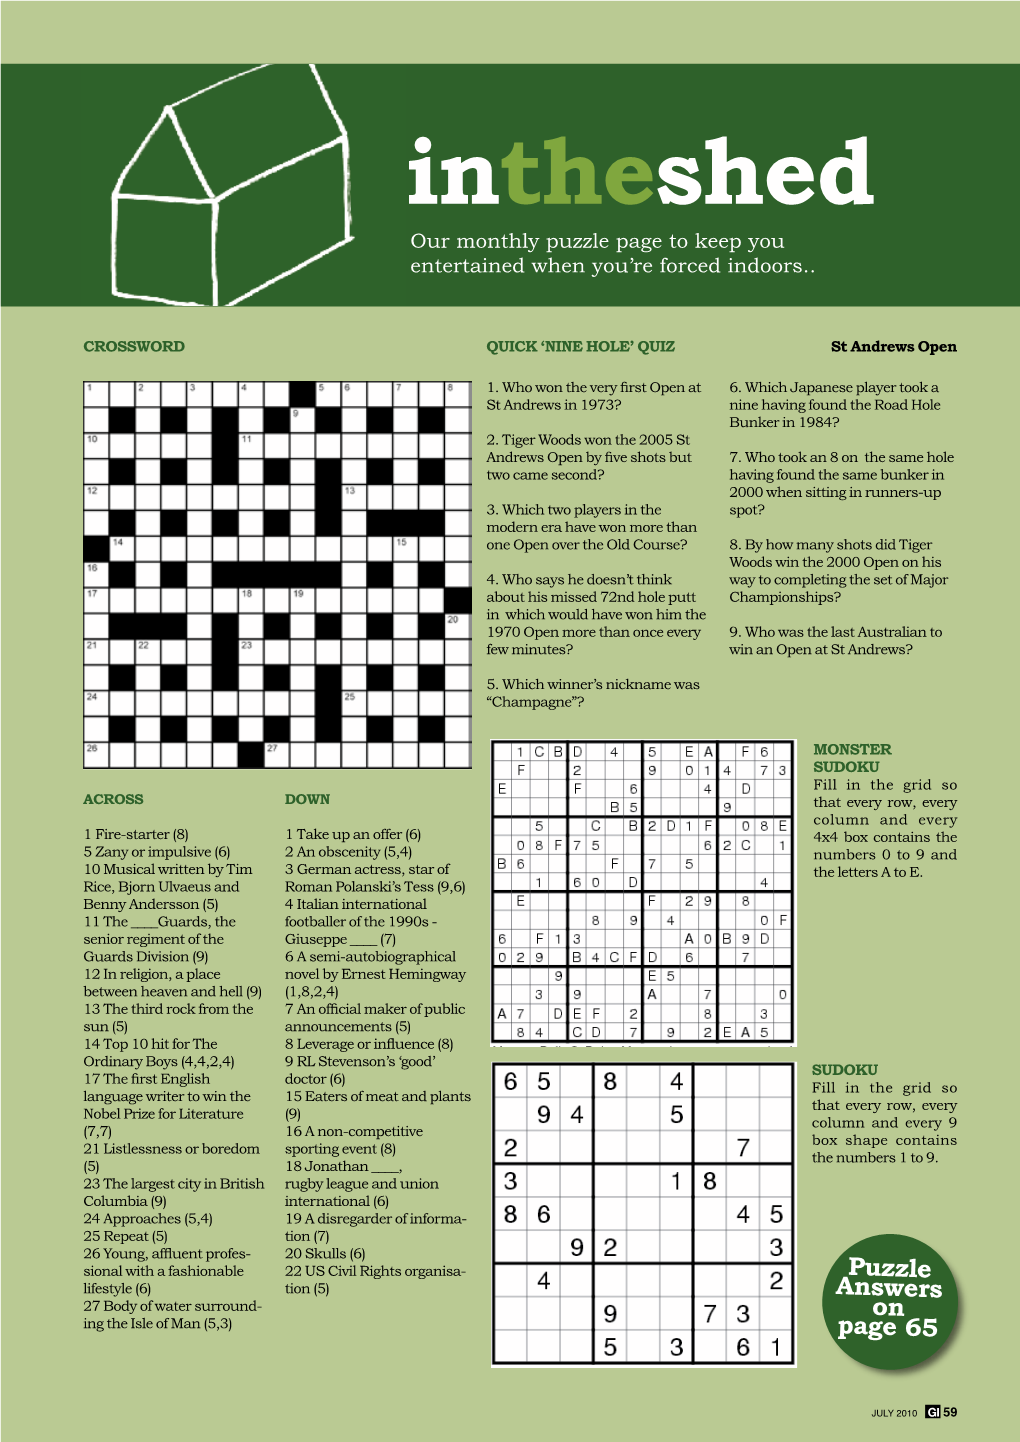 Intheshed Our Monthly Puzzle Page to Keep You Entertained When You’Re Forced Indoors